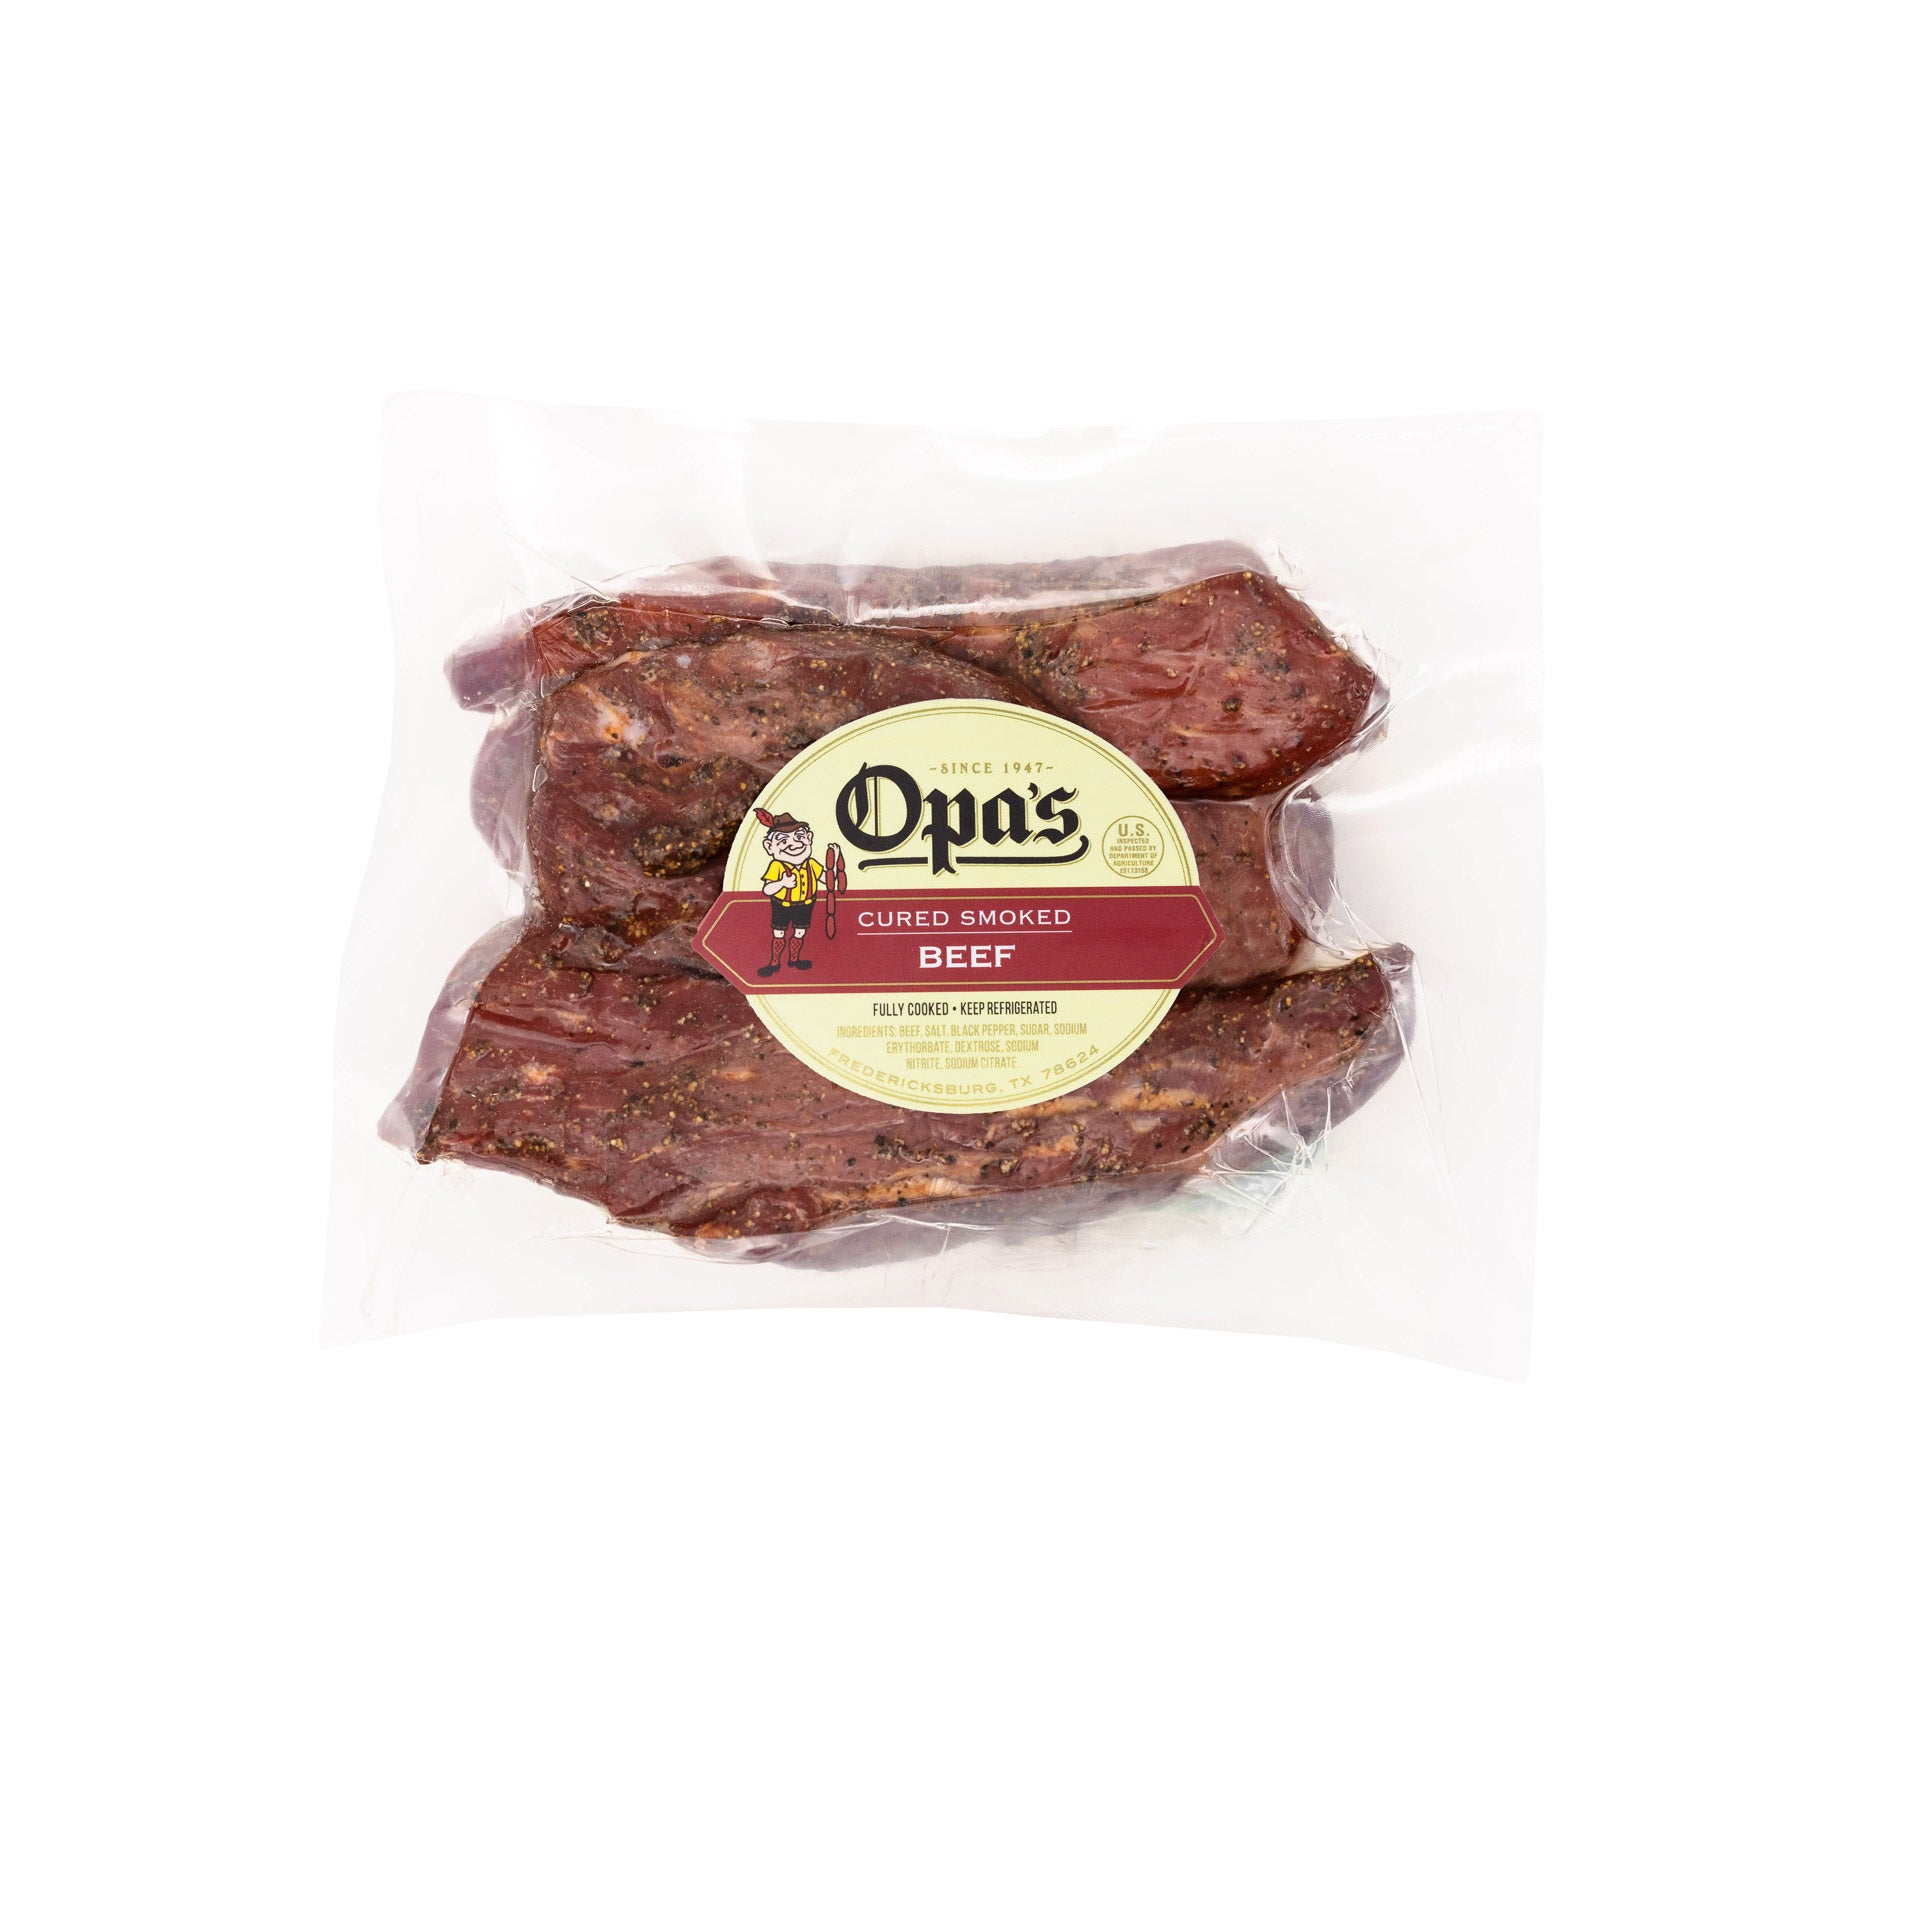 Opa's Peppered Cured Smoked Beef